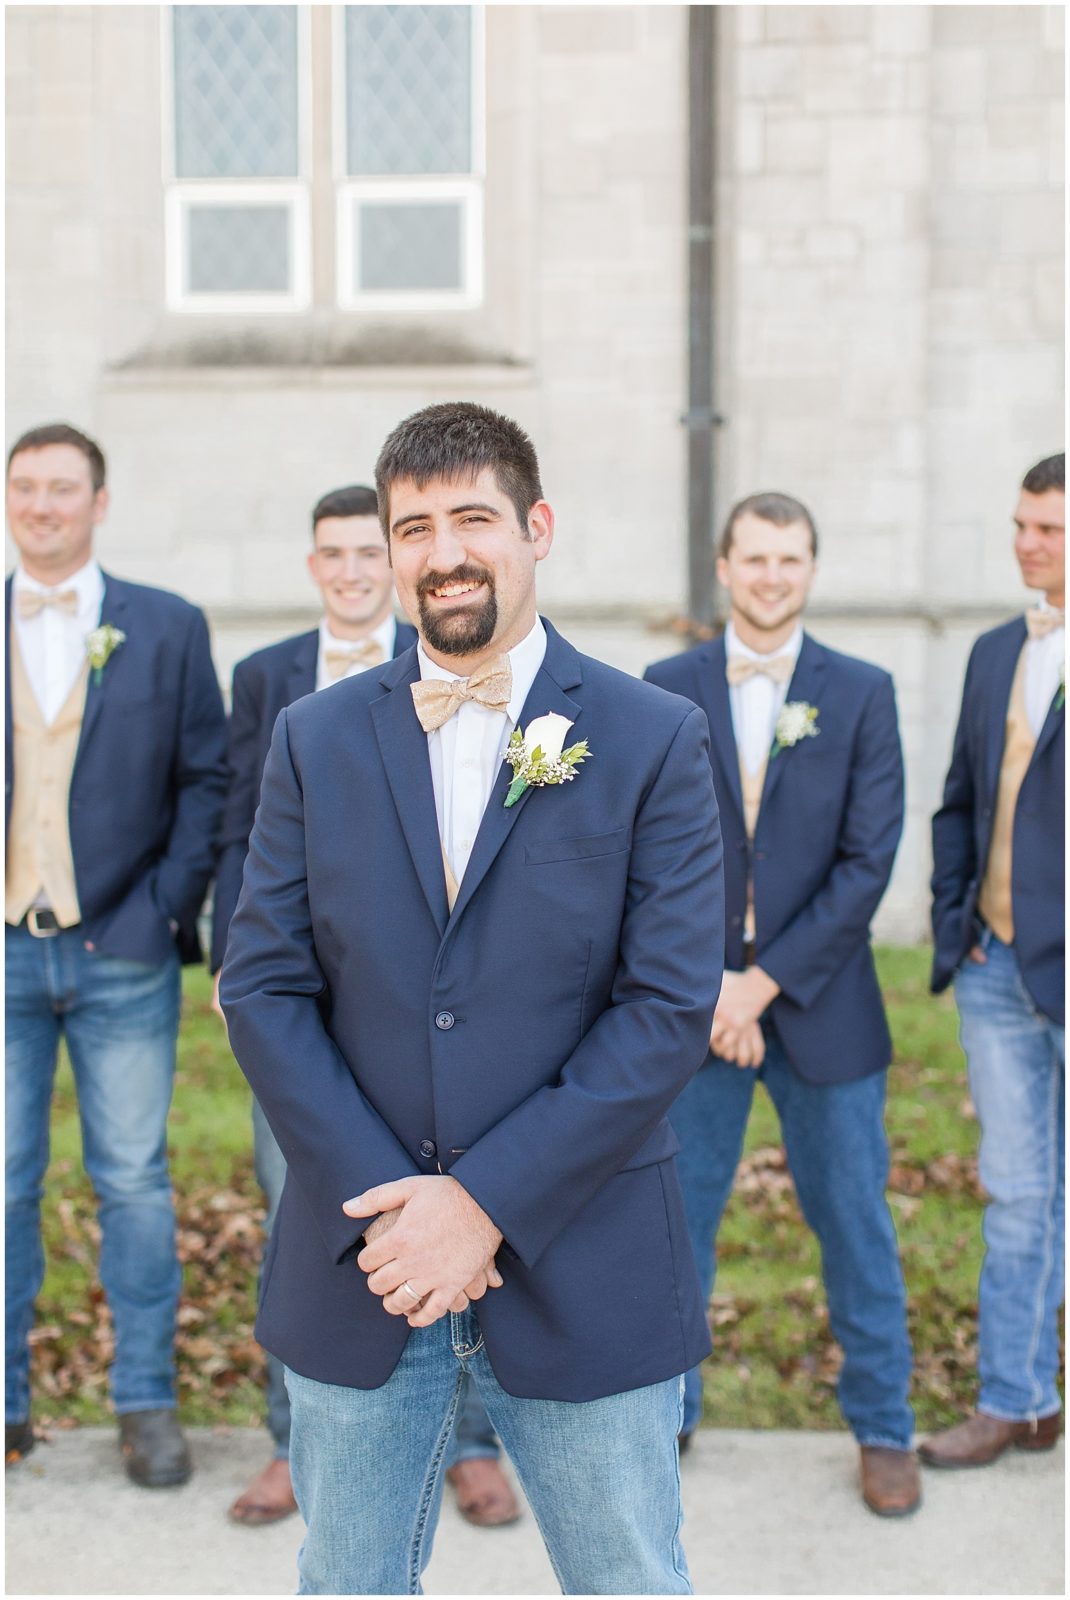 Bridal Party Portraits at Mamrelund Church in Stanton, Iowa shot by Jessica Brees, Sioux City Iowa engagement and wedding photographer